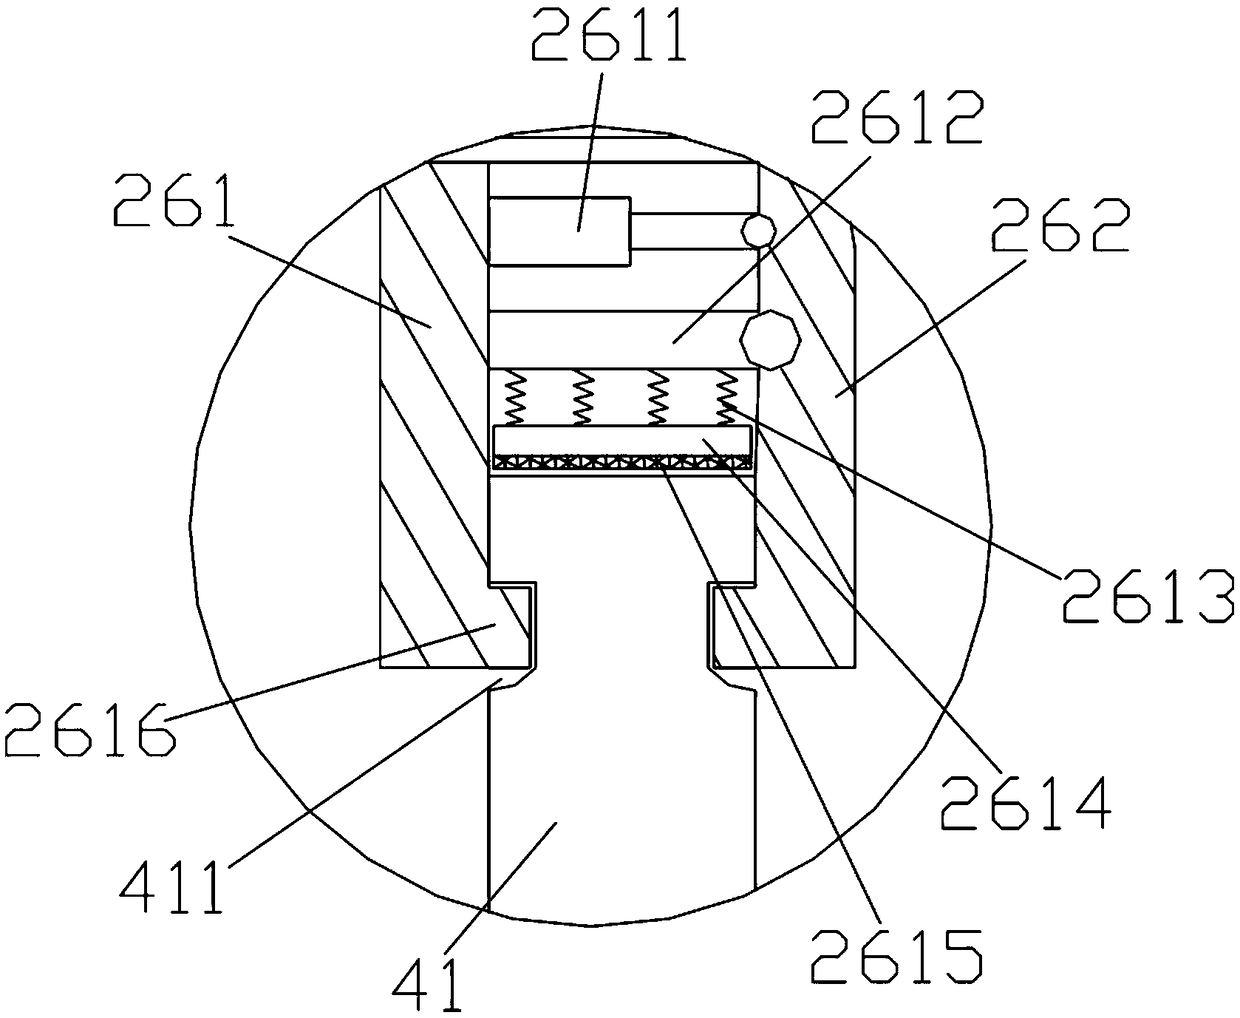 Soil detection device convenient for assembling and disassembling drill bit